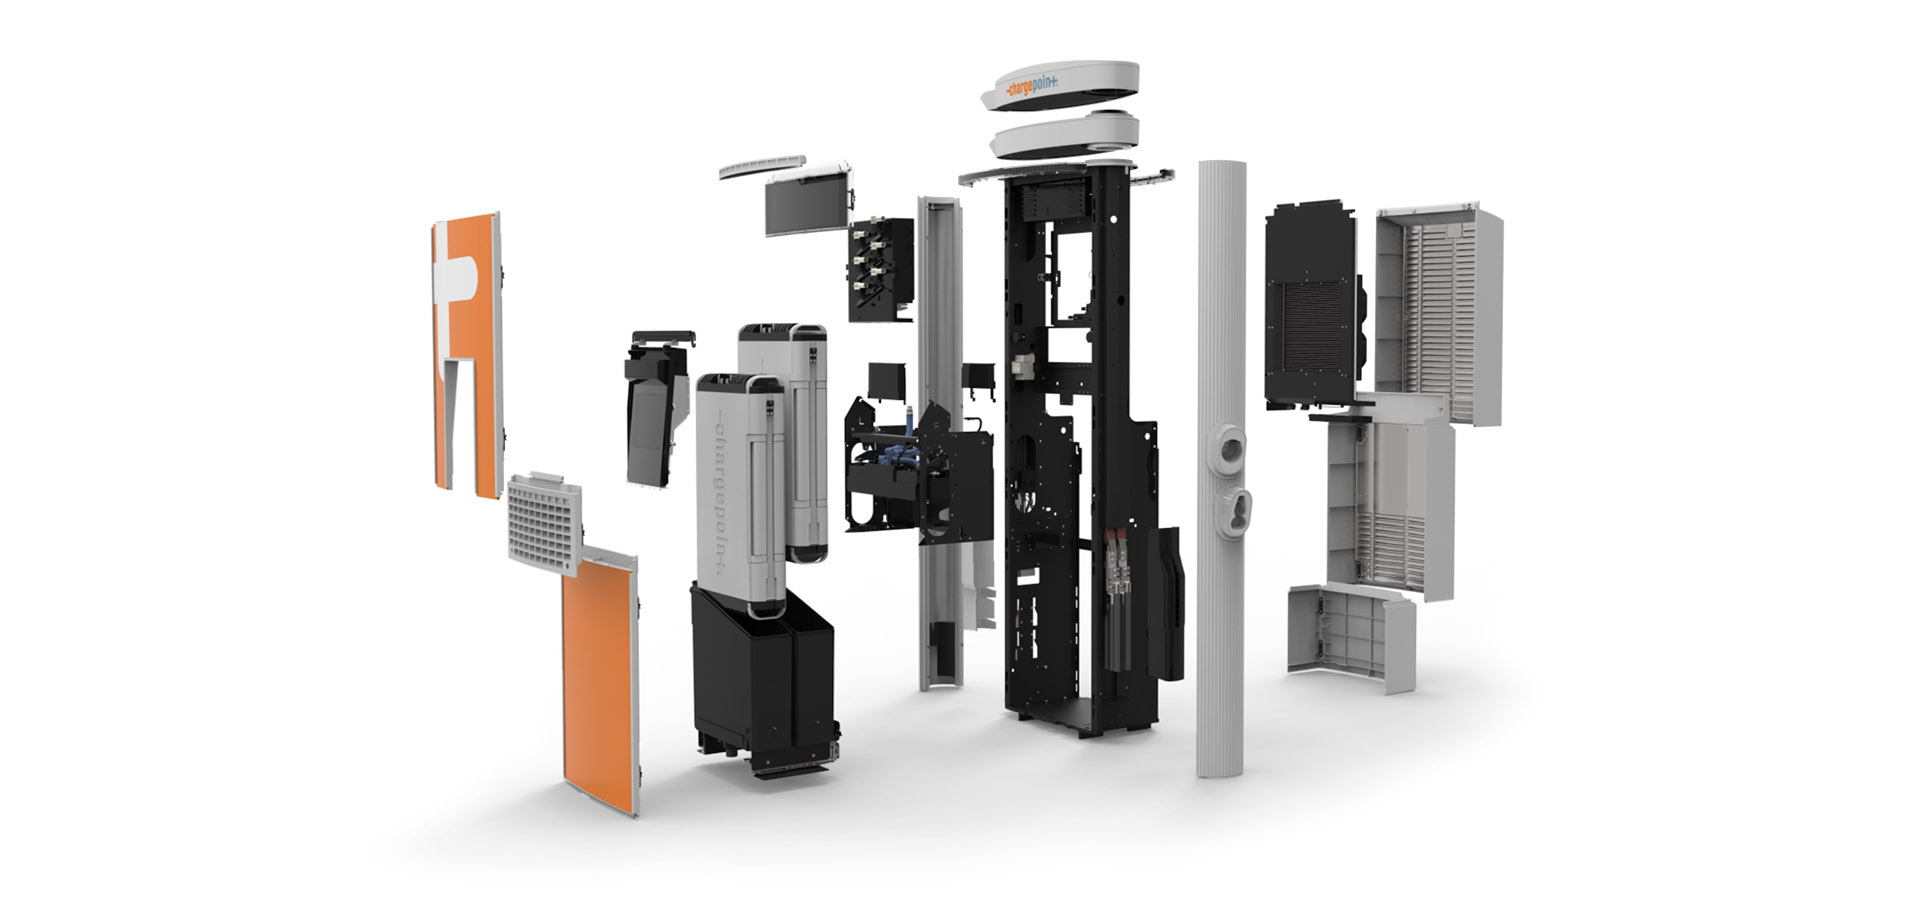 ChargePoint components